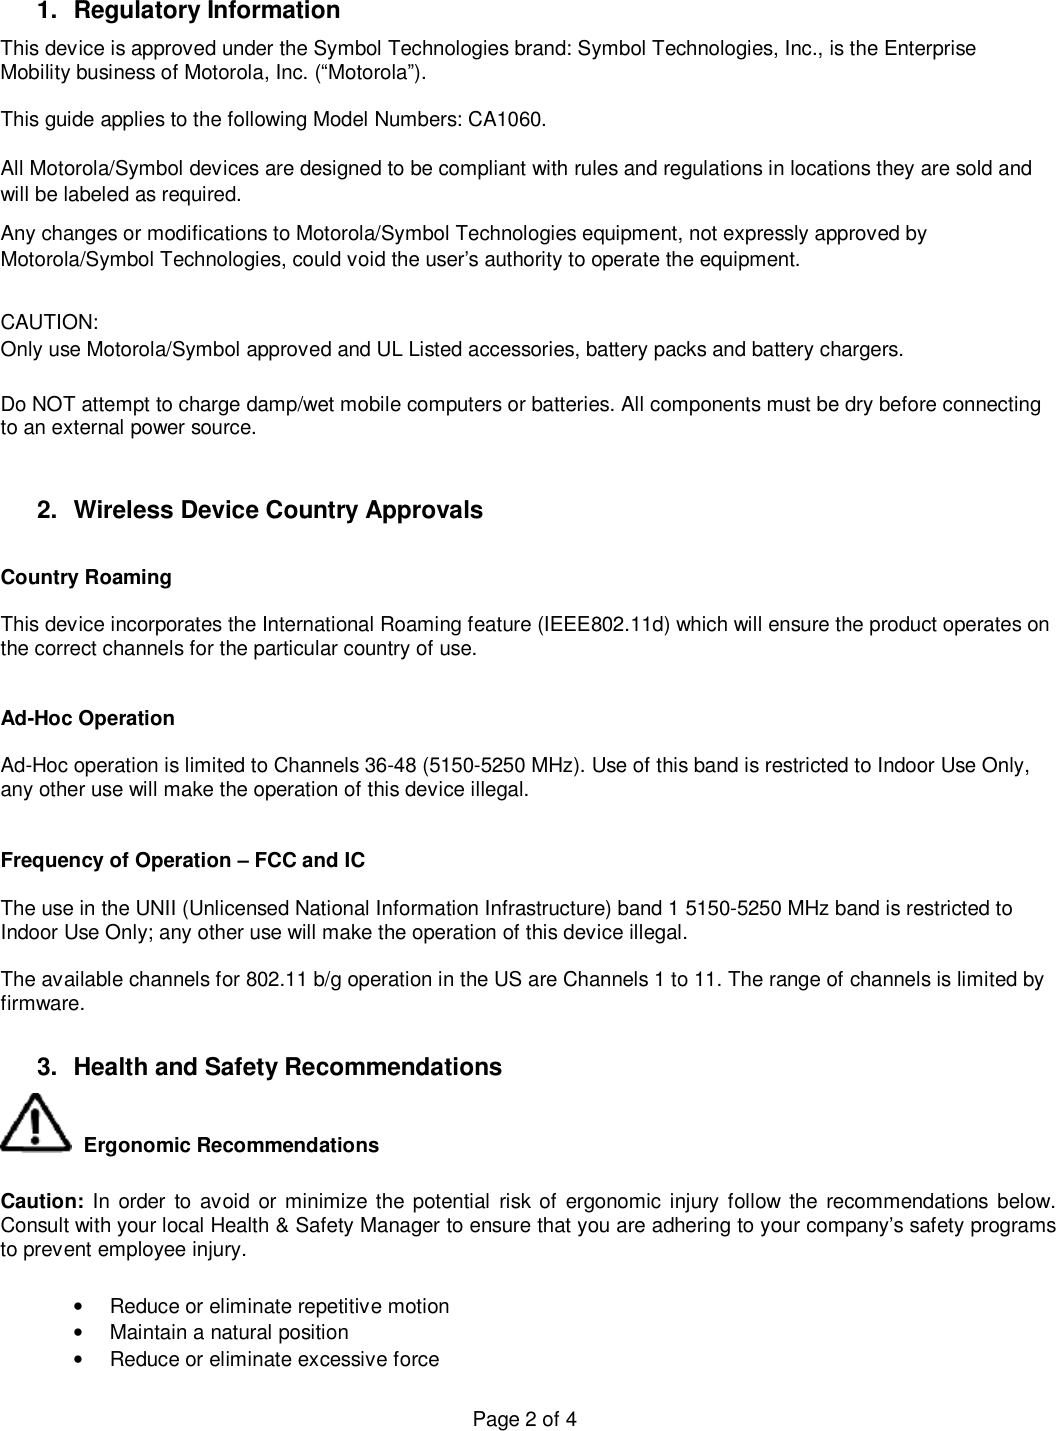  Page 2 of 4 1. Regulatory Information This device is approved under the Symbol Technologies brand: Symbol Technologies, Inc., is the Enterprise Mobility business of Motorola, Inc. (“Motorola”).  This guide applies to the following Model Numbers: CA1060.  All Motorola/Symbol devices are designed to be compliant with rules and regulations in locations they are sold and will be labeled as required.  Any changes or modifications to Motorola/Symbol Technologies equipment, not expressly approved by Motorola/Symbol Technologies, could void the user’s authority to operate the equipment.  CAUTION:   Only use Motorola/Symbol approved and UL Listed accessories, battery packs and battery chargers.  Do NOT attempt to charge damp/wet mobile computers or batteries. All components must be dry before connecting to an external power source.   2. Wireless Device Country Approvals  Country Roaming   This device incorporates the International Roaming feature (IEEE802.11d) which will ensure the product operates on the correct channels for the particular country of use.     Ad-Hoc Operation   Ad-Hoc operation is limited to Channels 36-48 (5150-5250 MHz). Use of this band is restricted to Indoor Use Only, any other use will make the operation of this device illegal.   Frequency of Operation – FCC and IC   The use in the UNII (Unlicensed National Information Infrastructure) band 1 5150-5250 MHz band is restricted to Indoor Use Only; any other use will make the operation of this device illegal.  The available channels for 802.11 b/g operation in the US are Channels 1 to 11. The range of channels is limited by firmware.  3. Health and Safety Recommendations  Ergonomic Recommendations   Caution: In order to avoid or minimize the potential risk of ergonomic injury follow the recommendations below. Consult with your local Health &amp; Safety Manager to ensure that you are adhering to your company’s safety programs to prevent employee injury.  • Reduce or eliminate repetitive motion • Maintain a natural position • Reduce or eliminate excessive force 